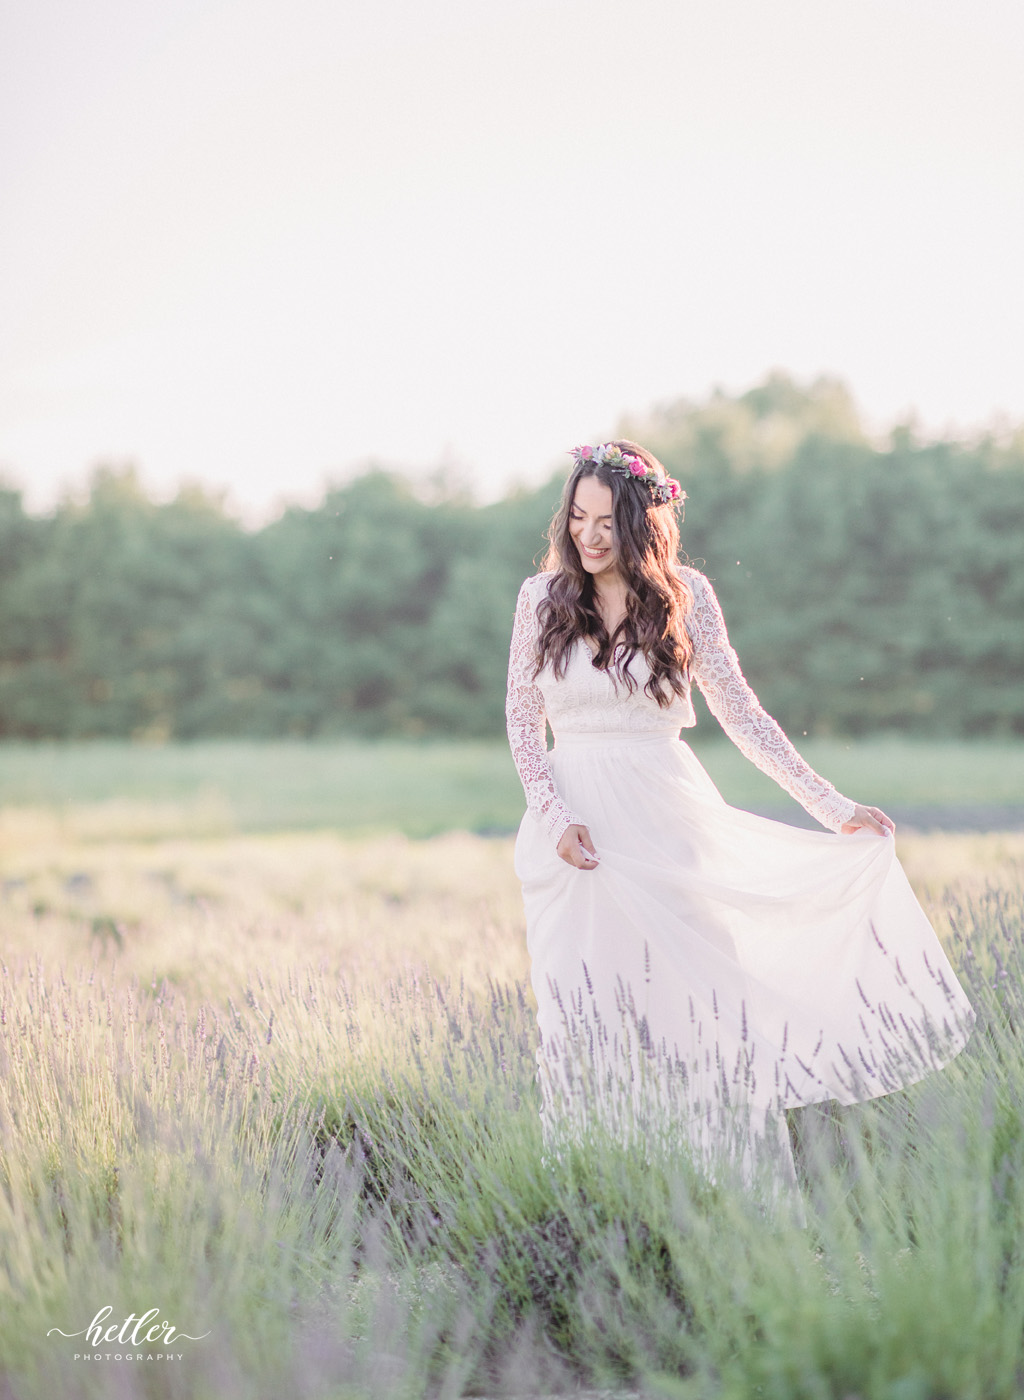 Kalamazoo wedding photography in a lavender field